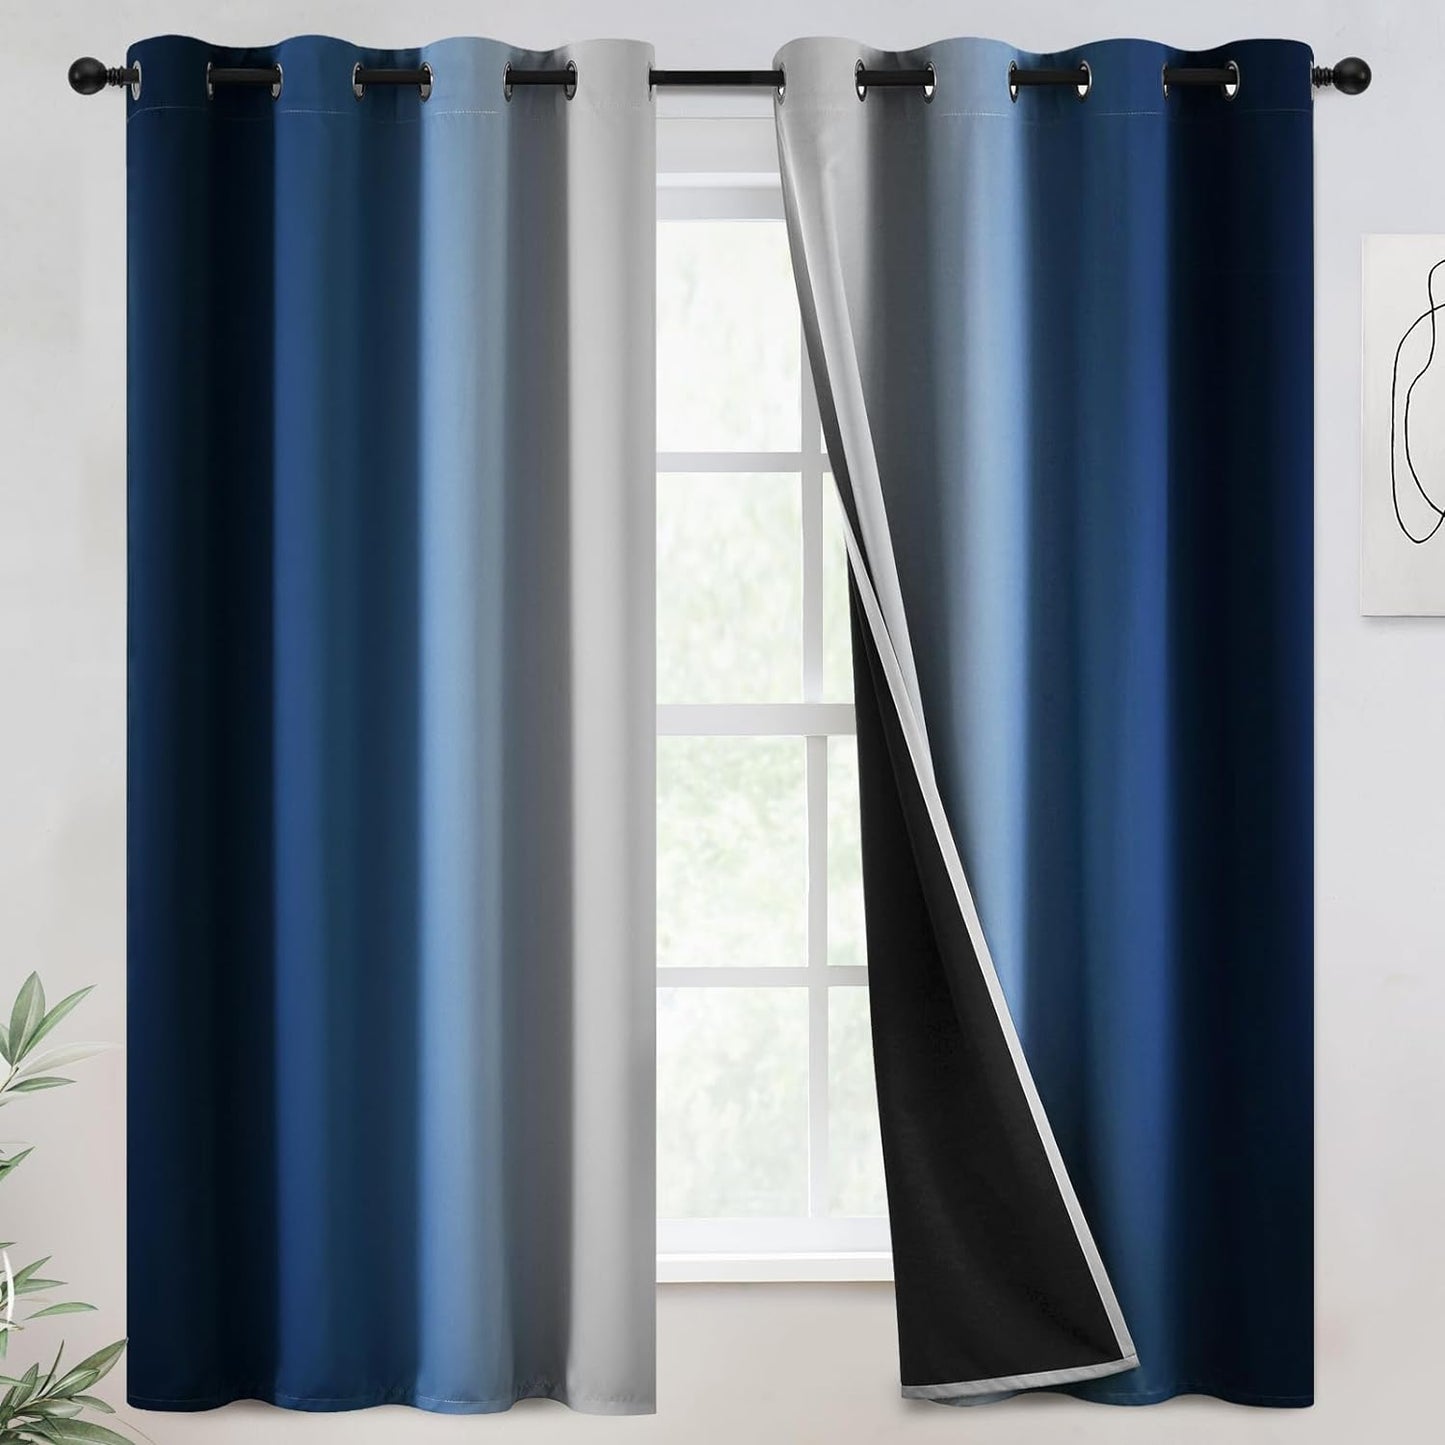 COSVIYA 100% Blackout Curtains & Drapes Ombre Purple Curtains 63 Inch Length 2 Panels,Full Room Darkening Grommet Gradient Insulated Thermal Window Curtains for Bedroom/Living Room,52X63 Inches  COSVIYA Blue To Greyish White 52W X 63L 